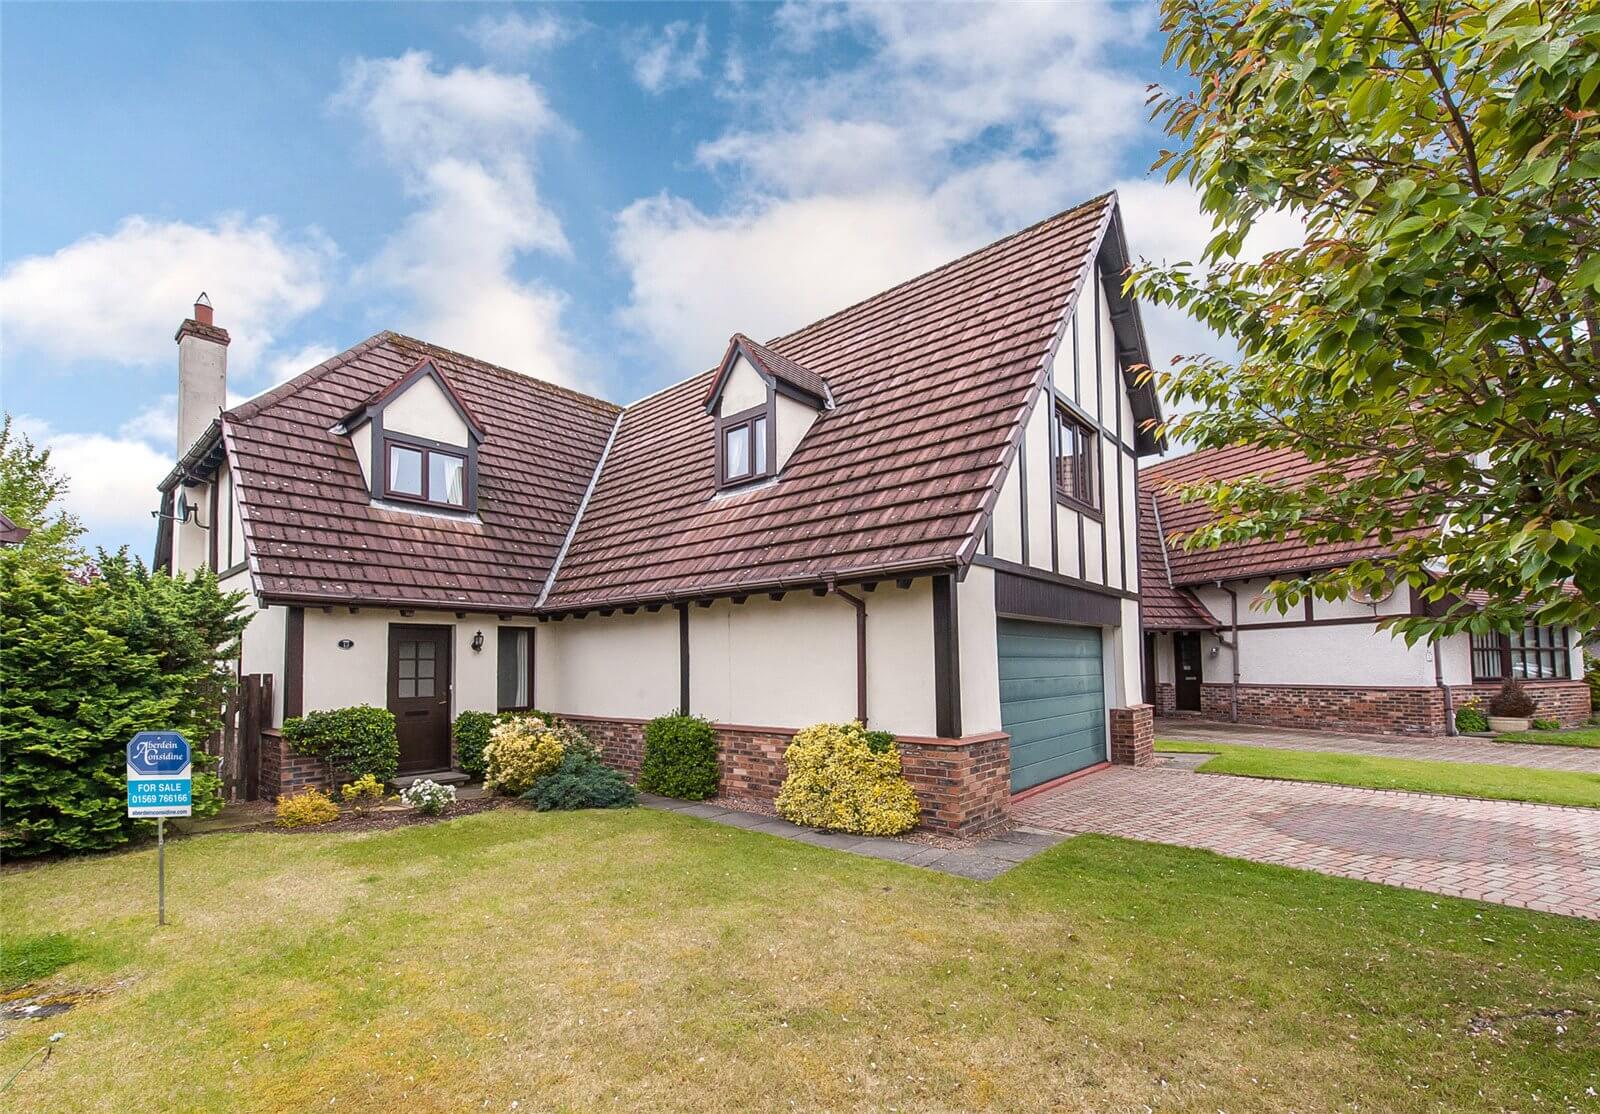 Our latest properties for sale and to let (10th June 2019)